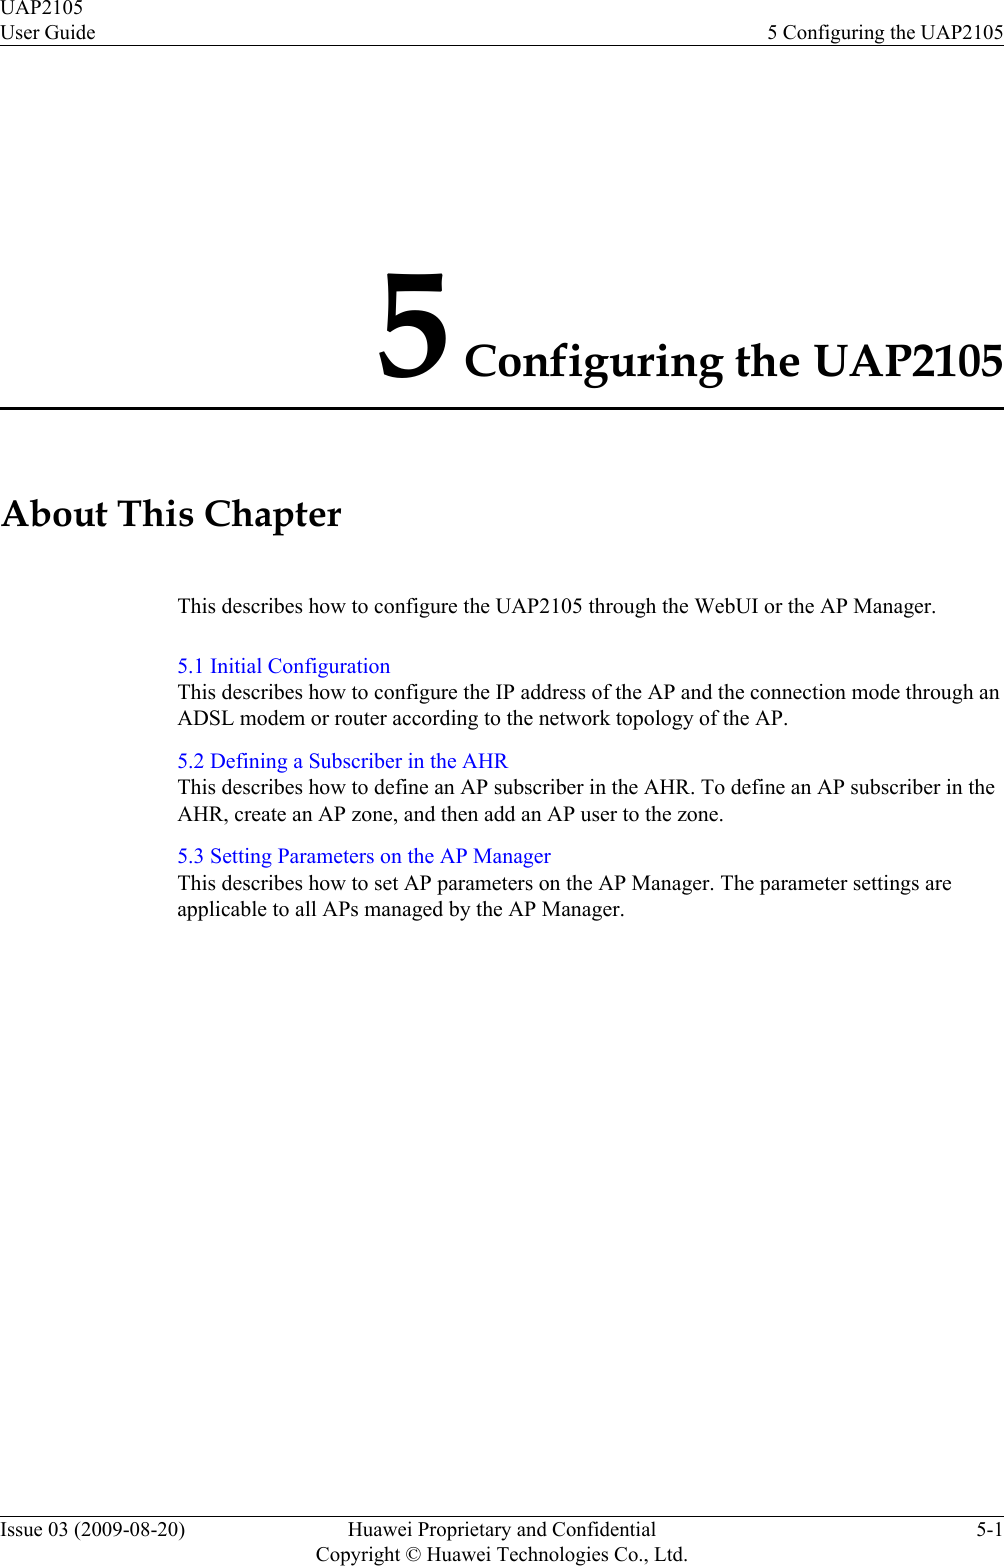 5 Configuring the UAP2105About This ChapterThis describes how to configure the UAP2105 through the WebUI or the AP Manager.5.1 Initial ConfigurationThis describes how to configure the IP address of the AP and the connection mode through anADSL modem or router according to the network topology of the AP.5.2 Defining a Subscriber in the AHRThis describes how to define an AP subscriber in the AHR. To define an AP subscriber in theAHR, create an AP zone, and then add an AP user to the zone.5.3 Setting Parameters on the AP ManagerThis describes how to set AP parameters on the AP Manager. The parameter settings areapplicable to all APs managed by the AP Manager.UAP2105User Guide 5 Configuring the UAP2105Issue 03 (2009-08-20) Huawei Proprietary and ConfidentialCopyright © Huawei Technologies Co., Ltd.5-1